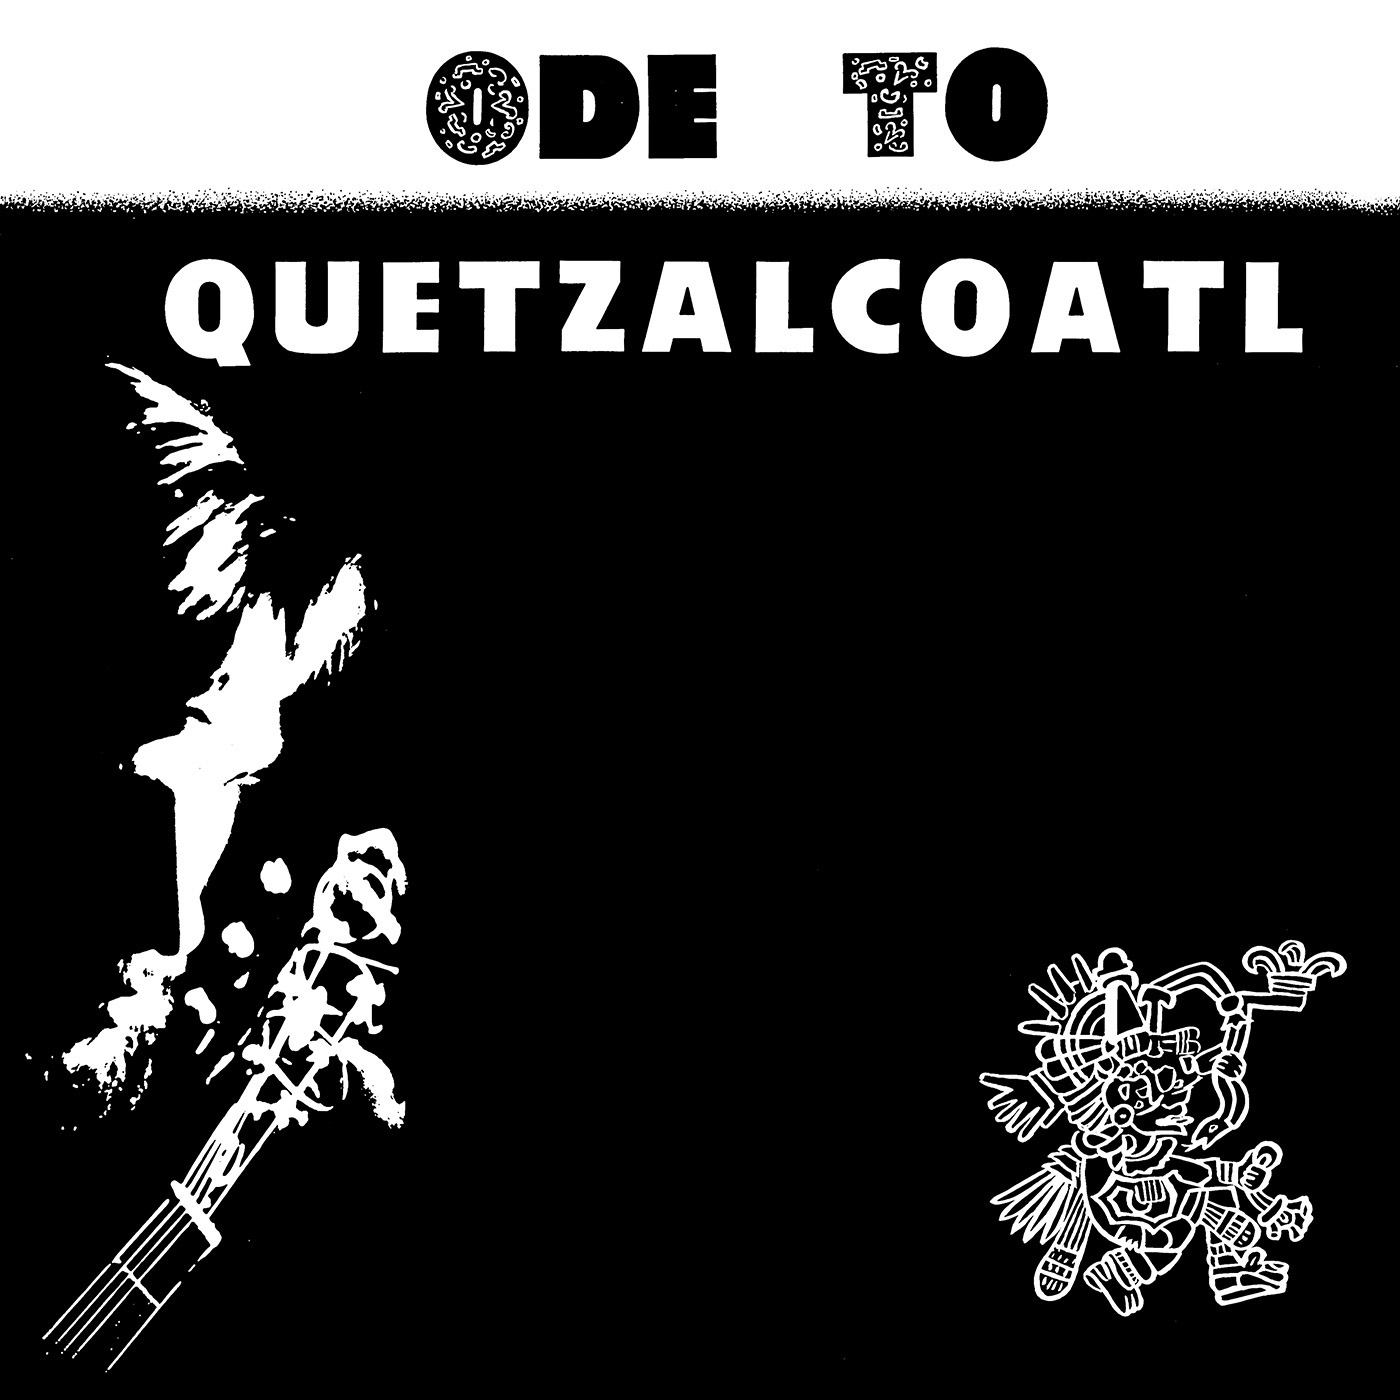 Ode To Quetzalcoatl by Dave Bixby